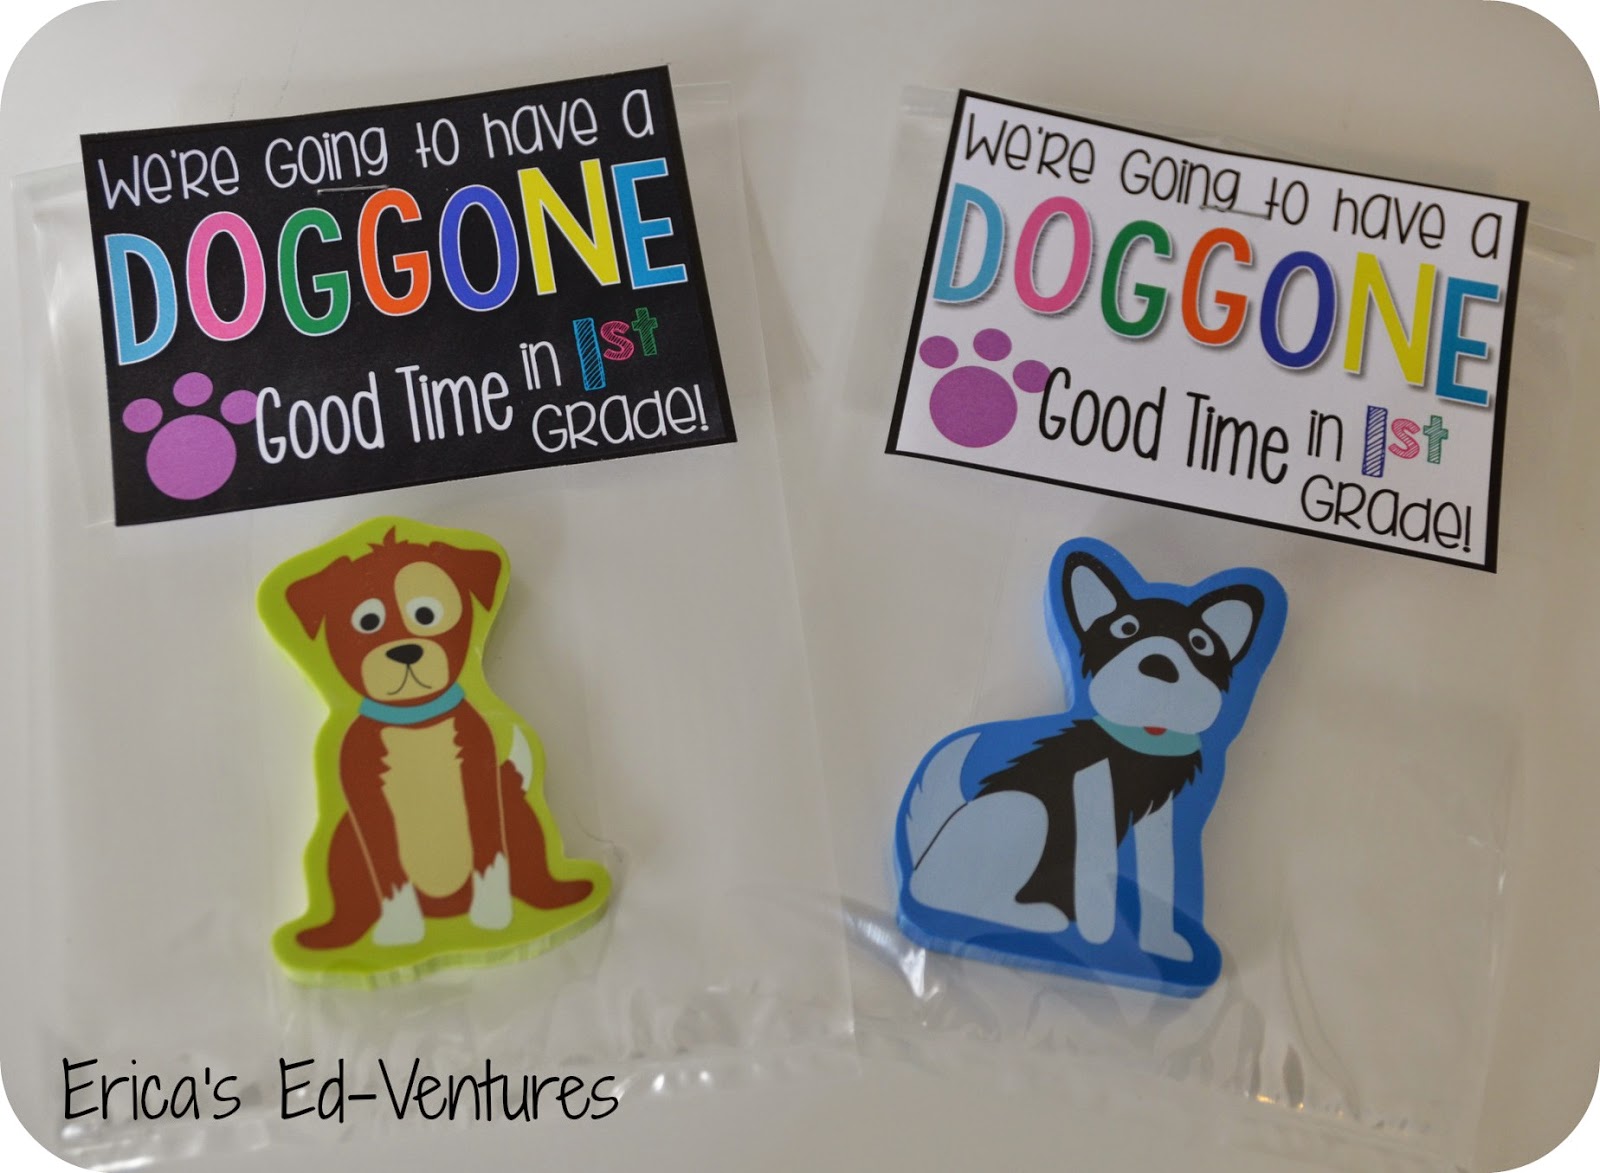 We're going to have a doggone good time in 1st grade.